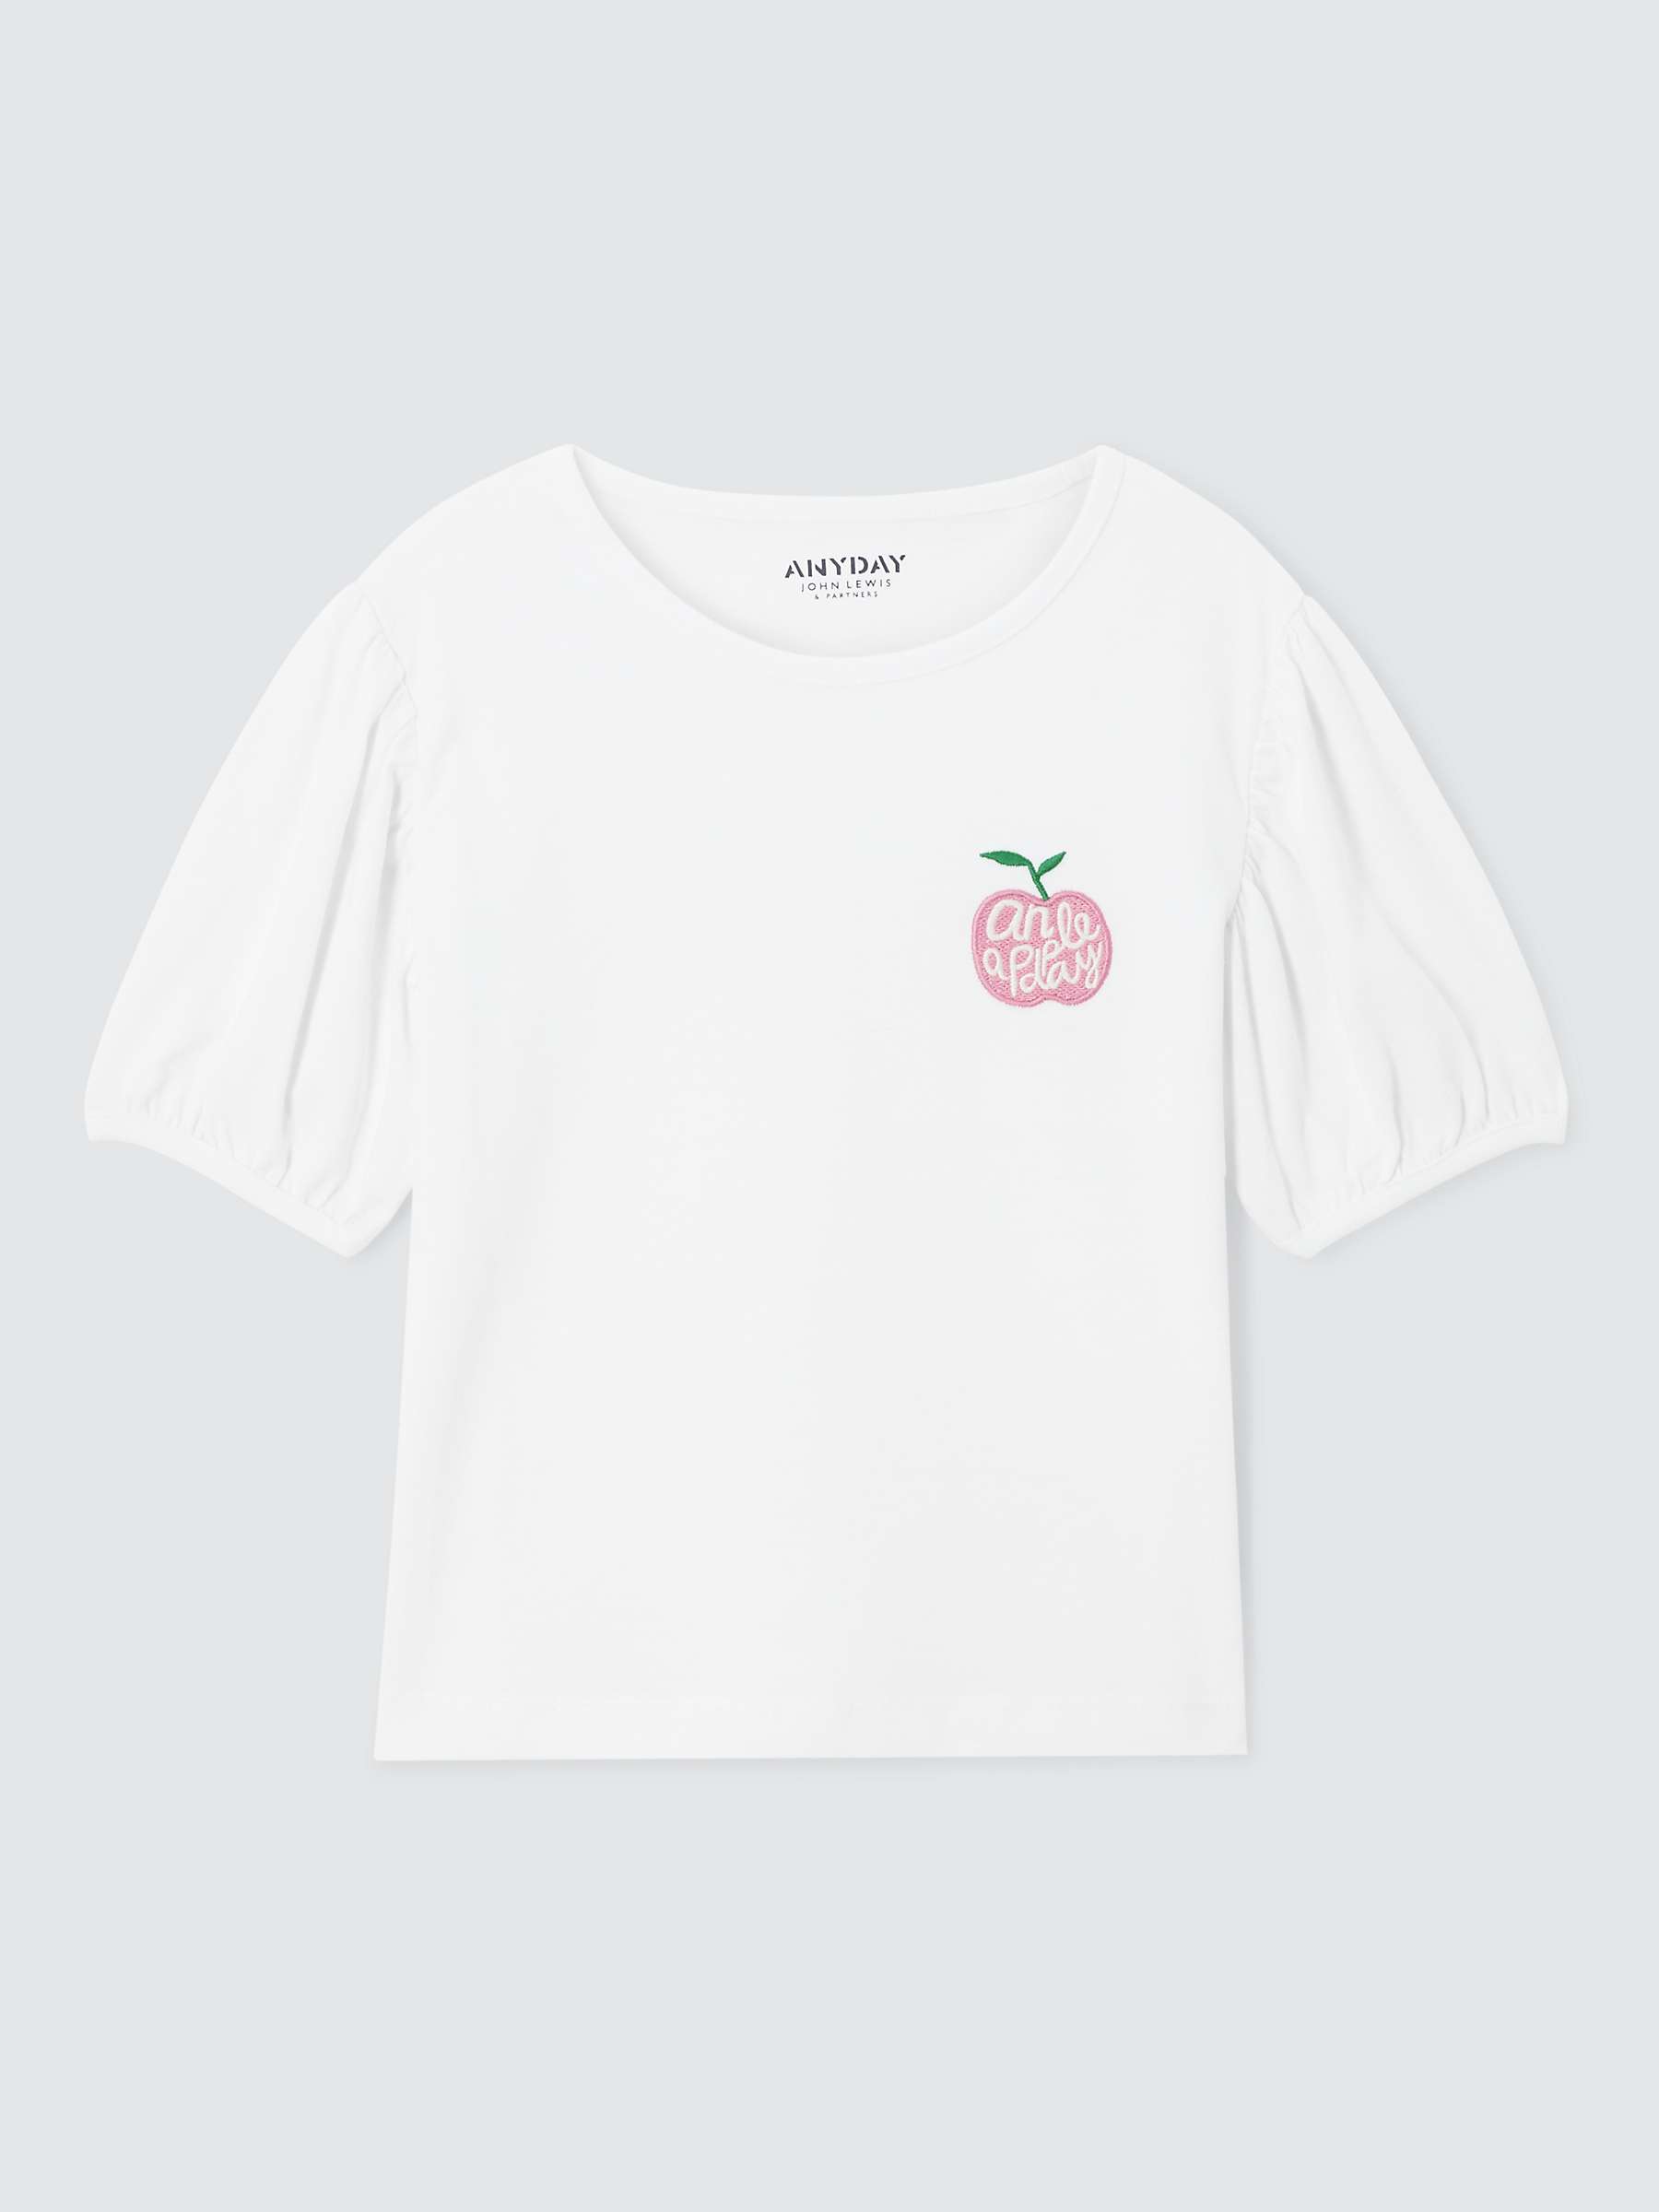 Buy John Lewis ANYDAY Kids' Puff Sleeve Apple T-Shirt, Bright White Online at johnlewis.com